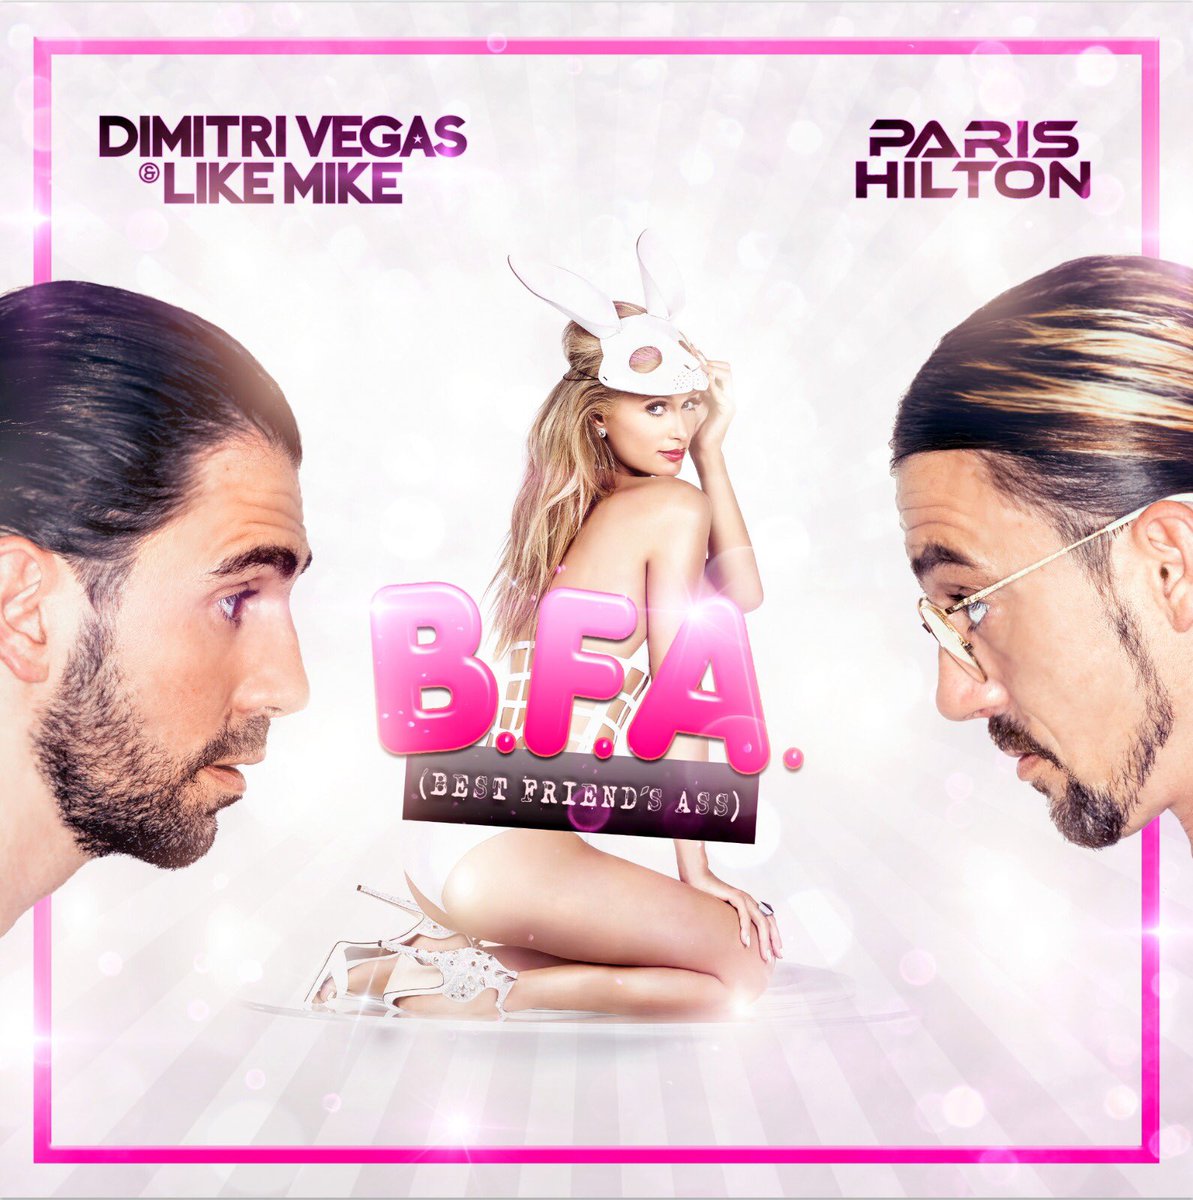 Download my new track #BestFriendsAss with @DimitriVegas & @RealLikeMike on @Spotify. ???????????????? https://t.co/azAFf8flY9